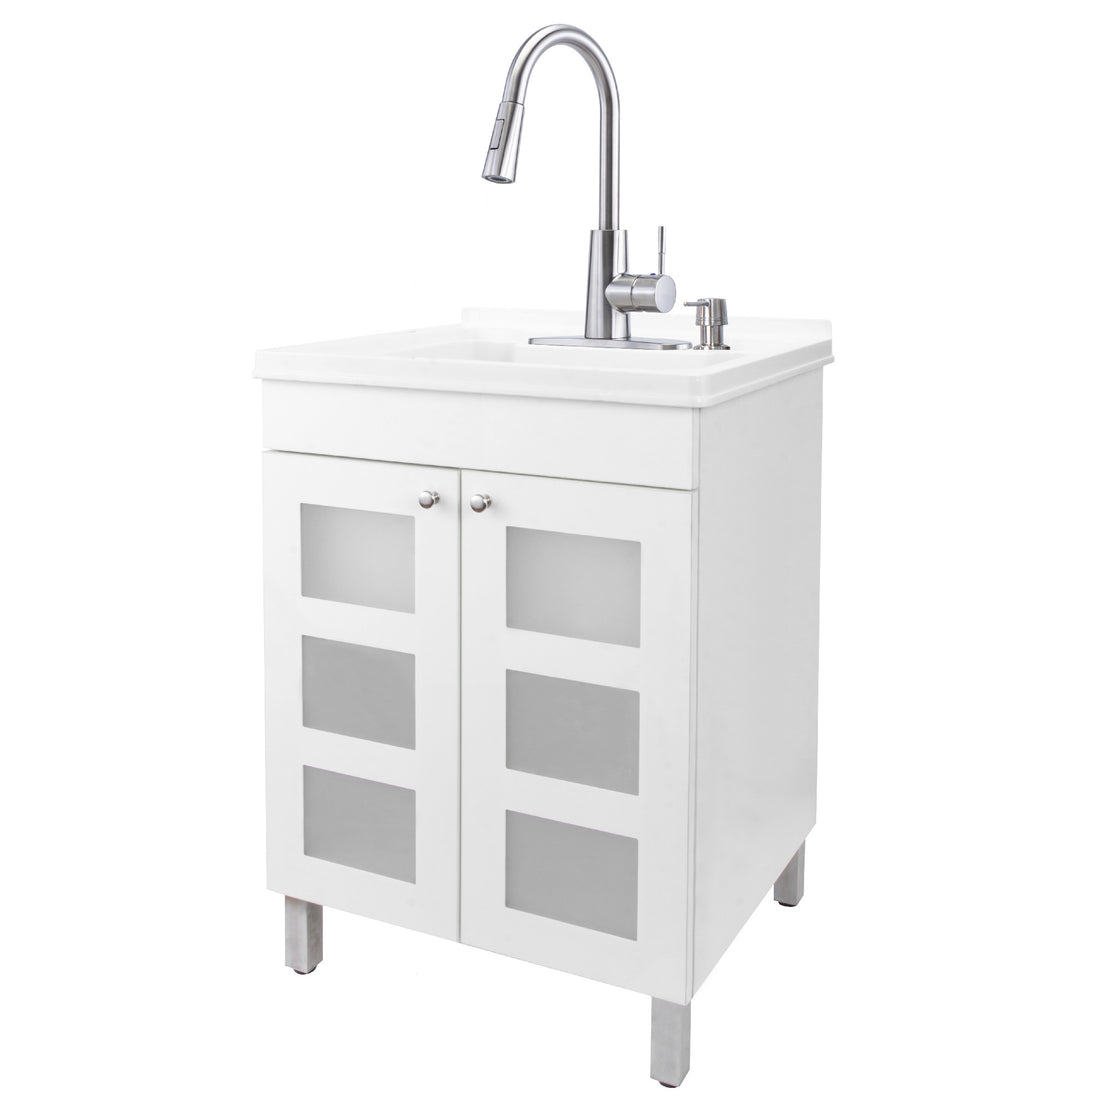 Tehila White Vanity Cabinet and White Utility Sink with Stainless Steel Finish High-Arc Pull-Down Faucet - Utility sinks vanites Tehila